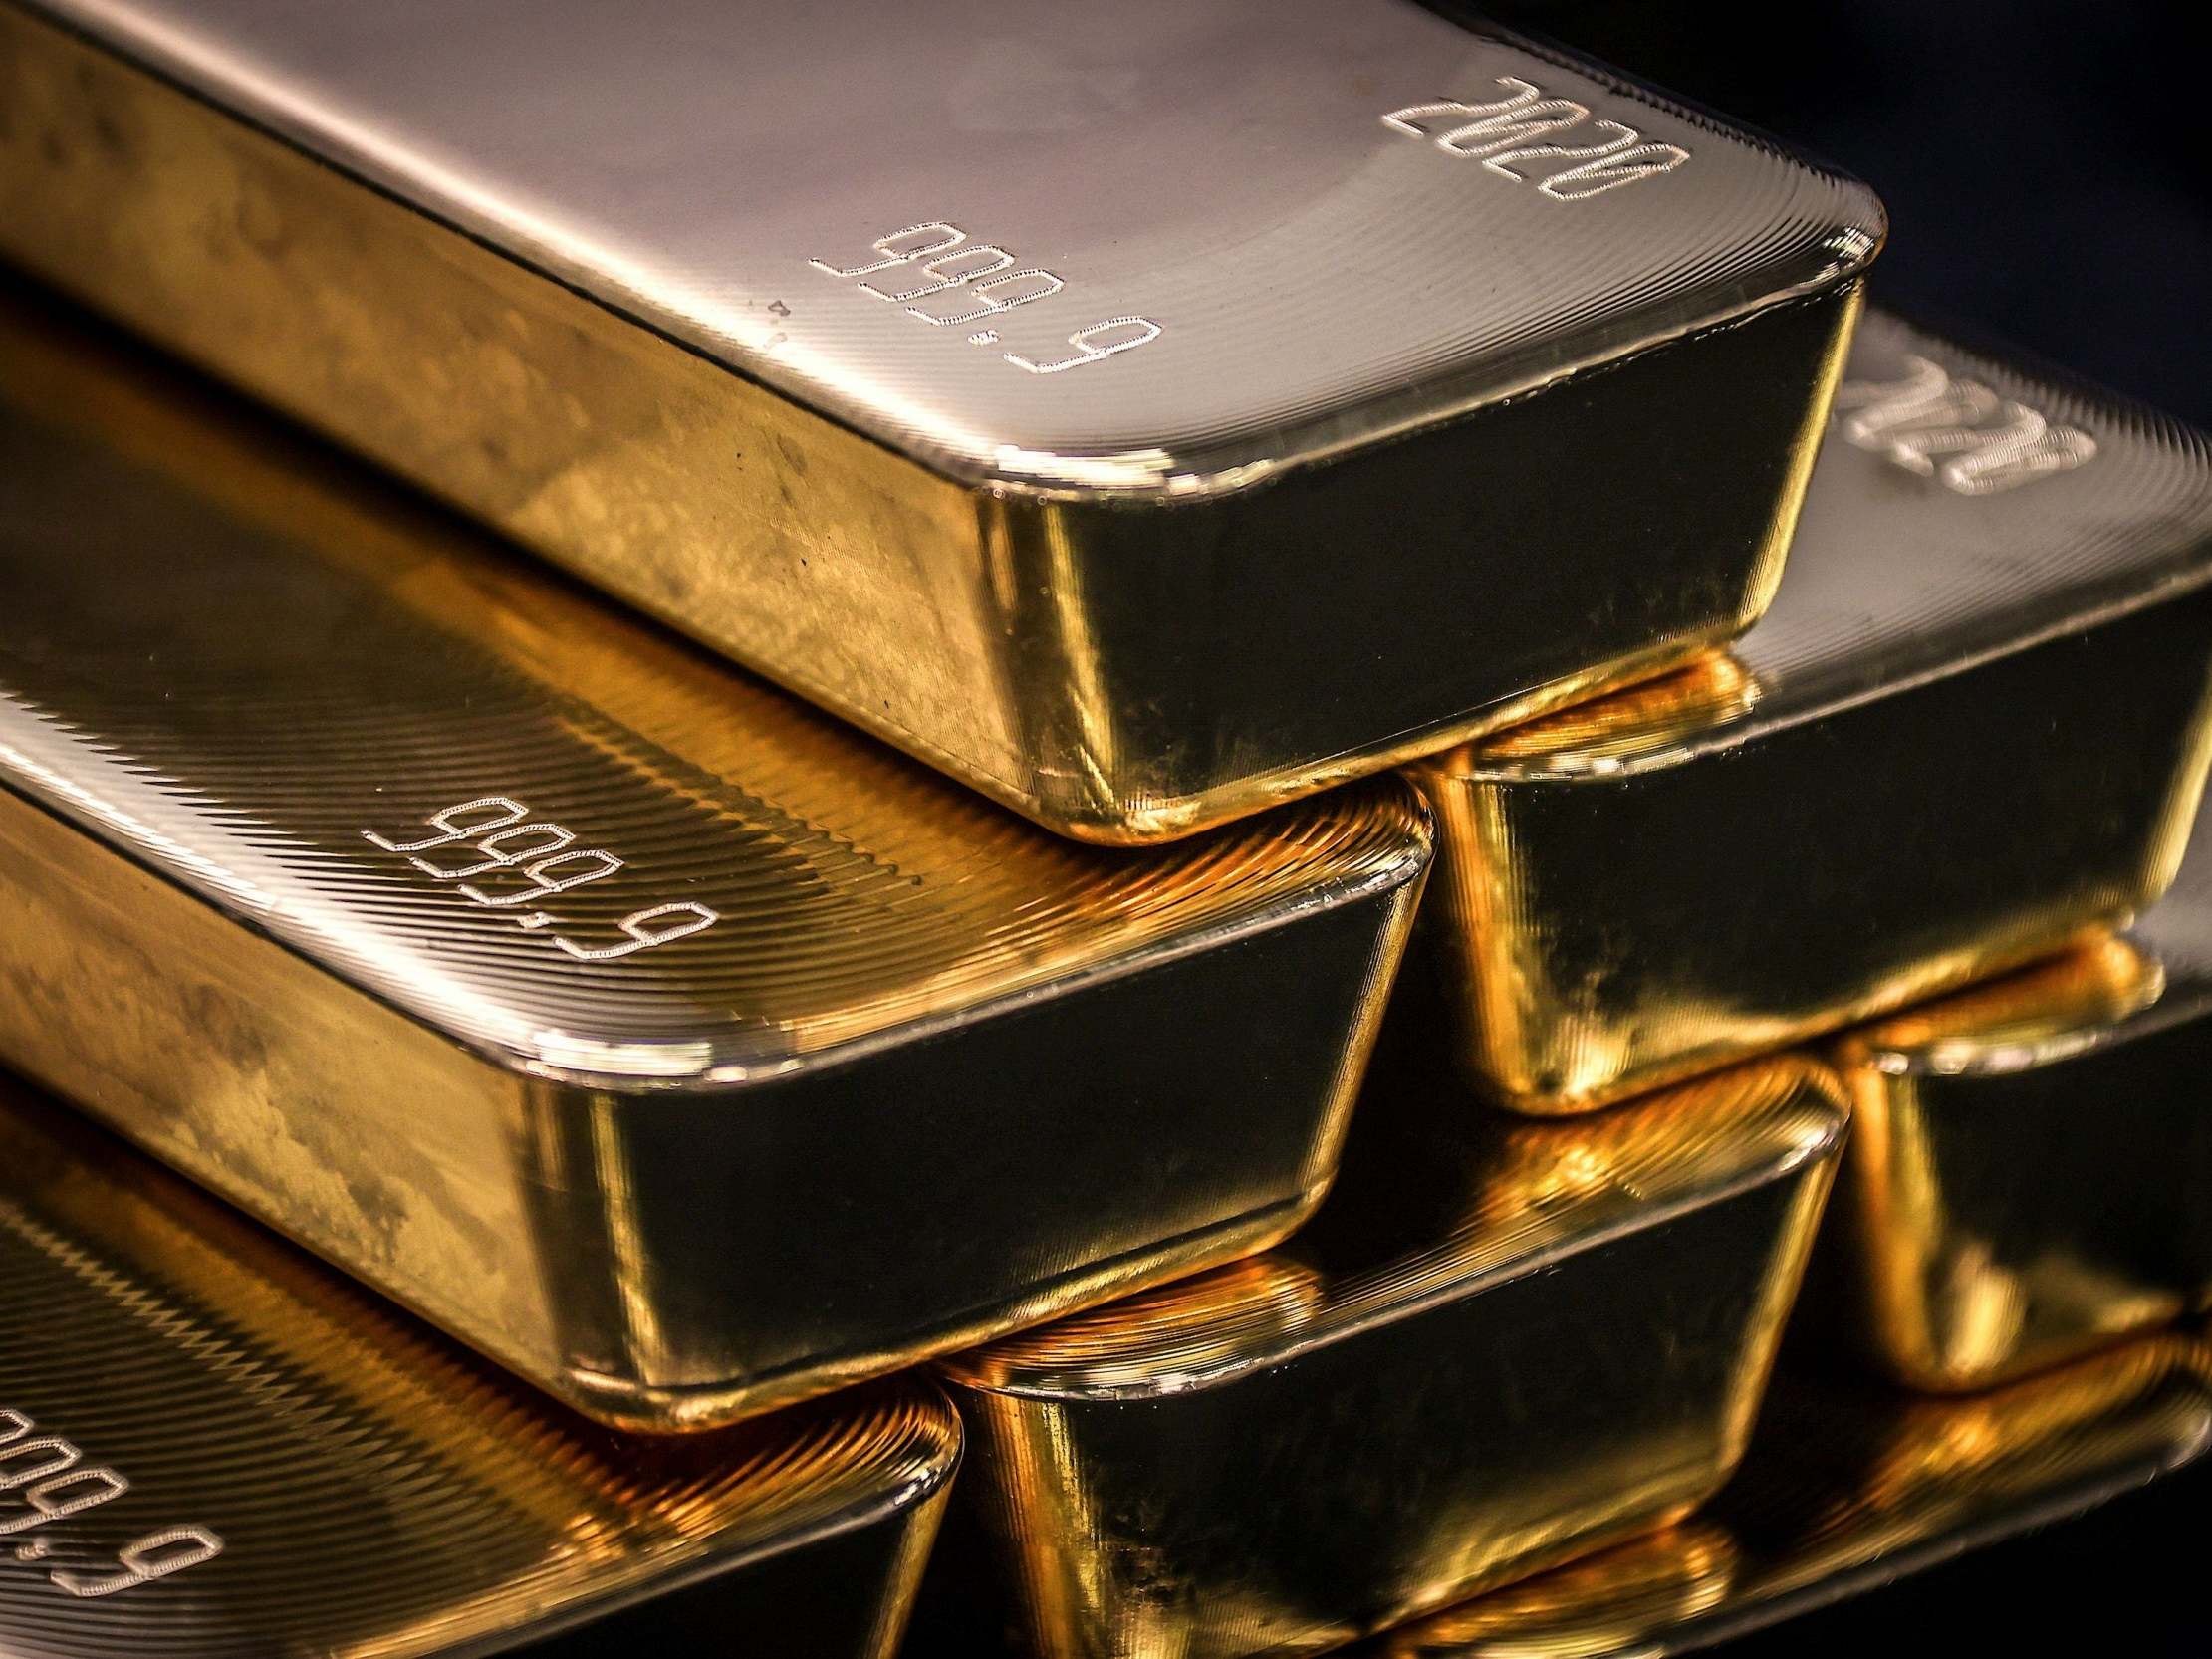 Gold is traditionally seen as a “safe haven” asset, meaning people that tend to buy it when there is economic and financial stress taking place in the wider economy